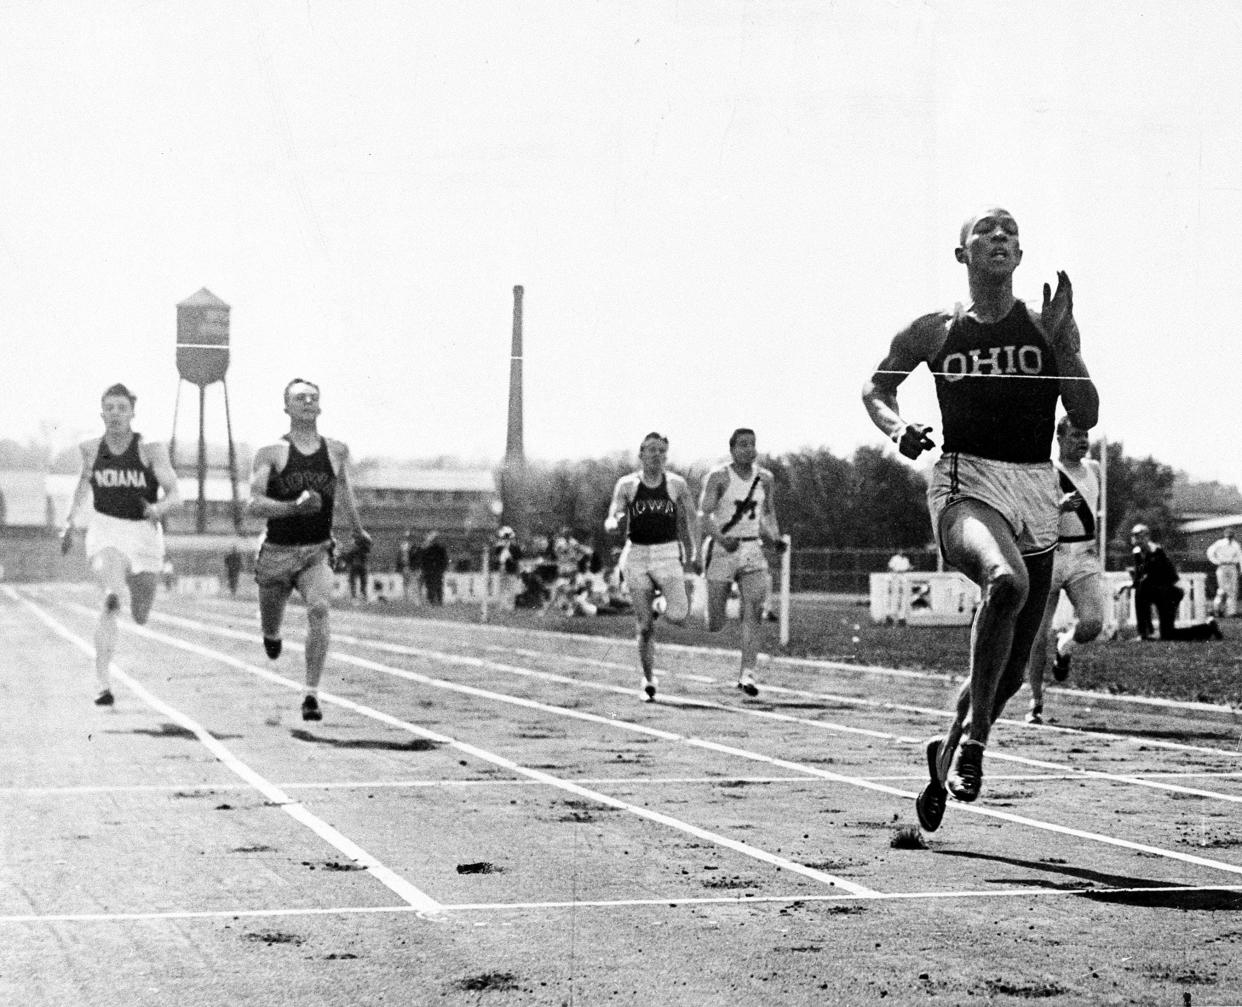 Jesse Owens of Ohio State University crosses the finish line in the 220-yard dash with a record speed of 20.3 seconds at the Big Ten Western Conference Track and Field meet at the University of Michigan in Ann Arbor, Mich., May 25, 1935. Owens, nicknamed the "Buckeye Bullet," broke three world records, including the 220-yard hurdle, 22.6; and the long jump, 26 feet, 1/4 inches. He tied the 100-yard dash record, 9.4 seconds.